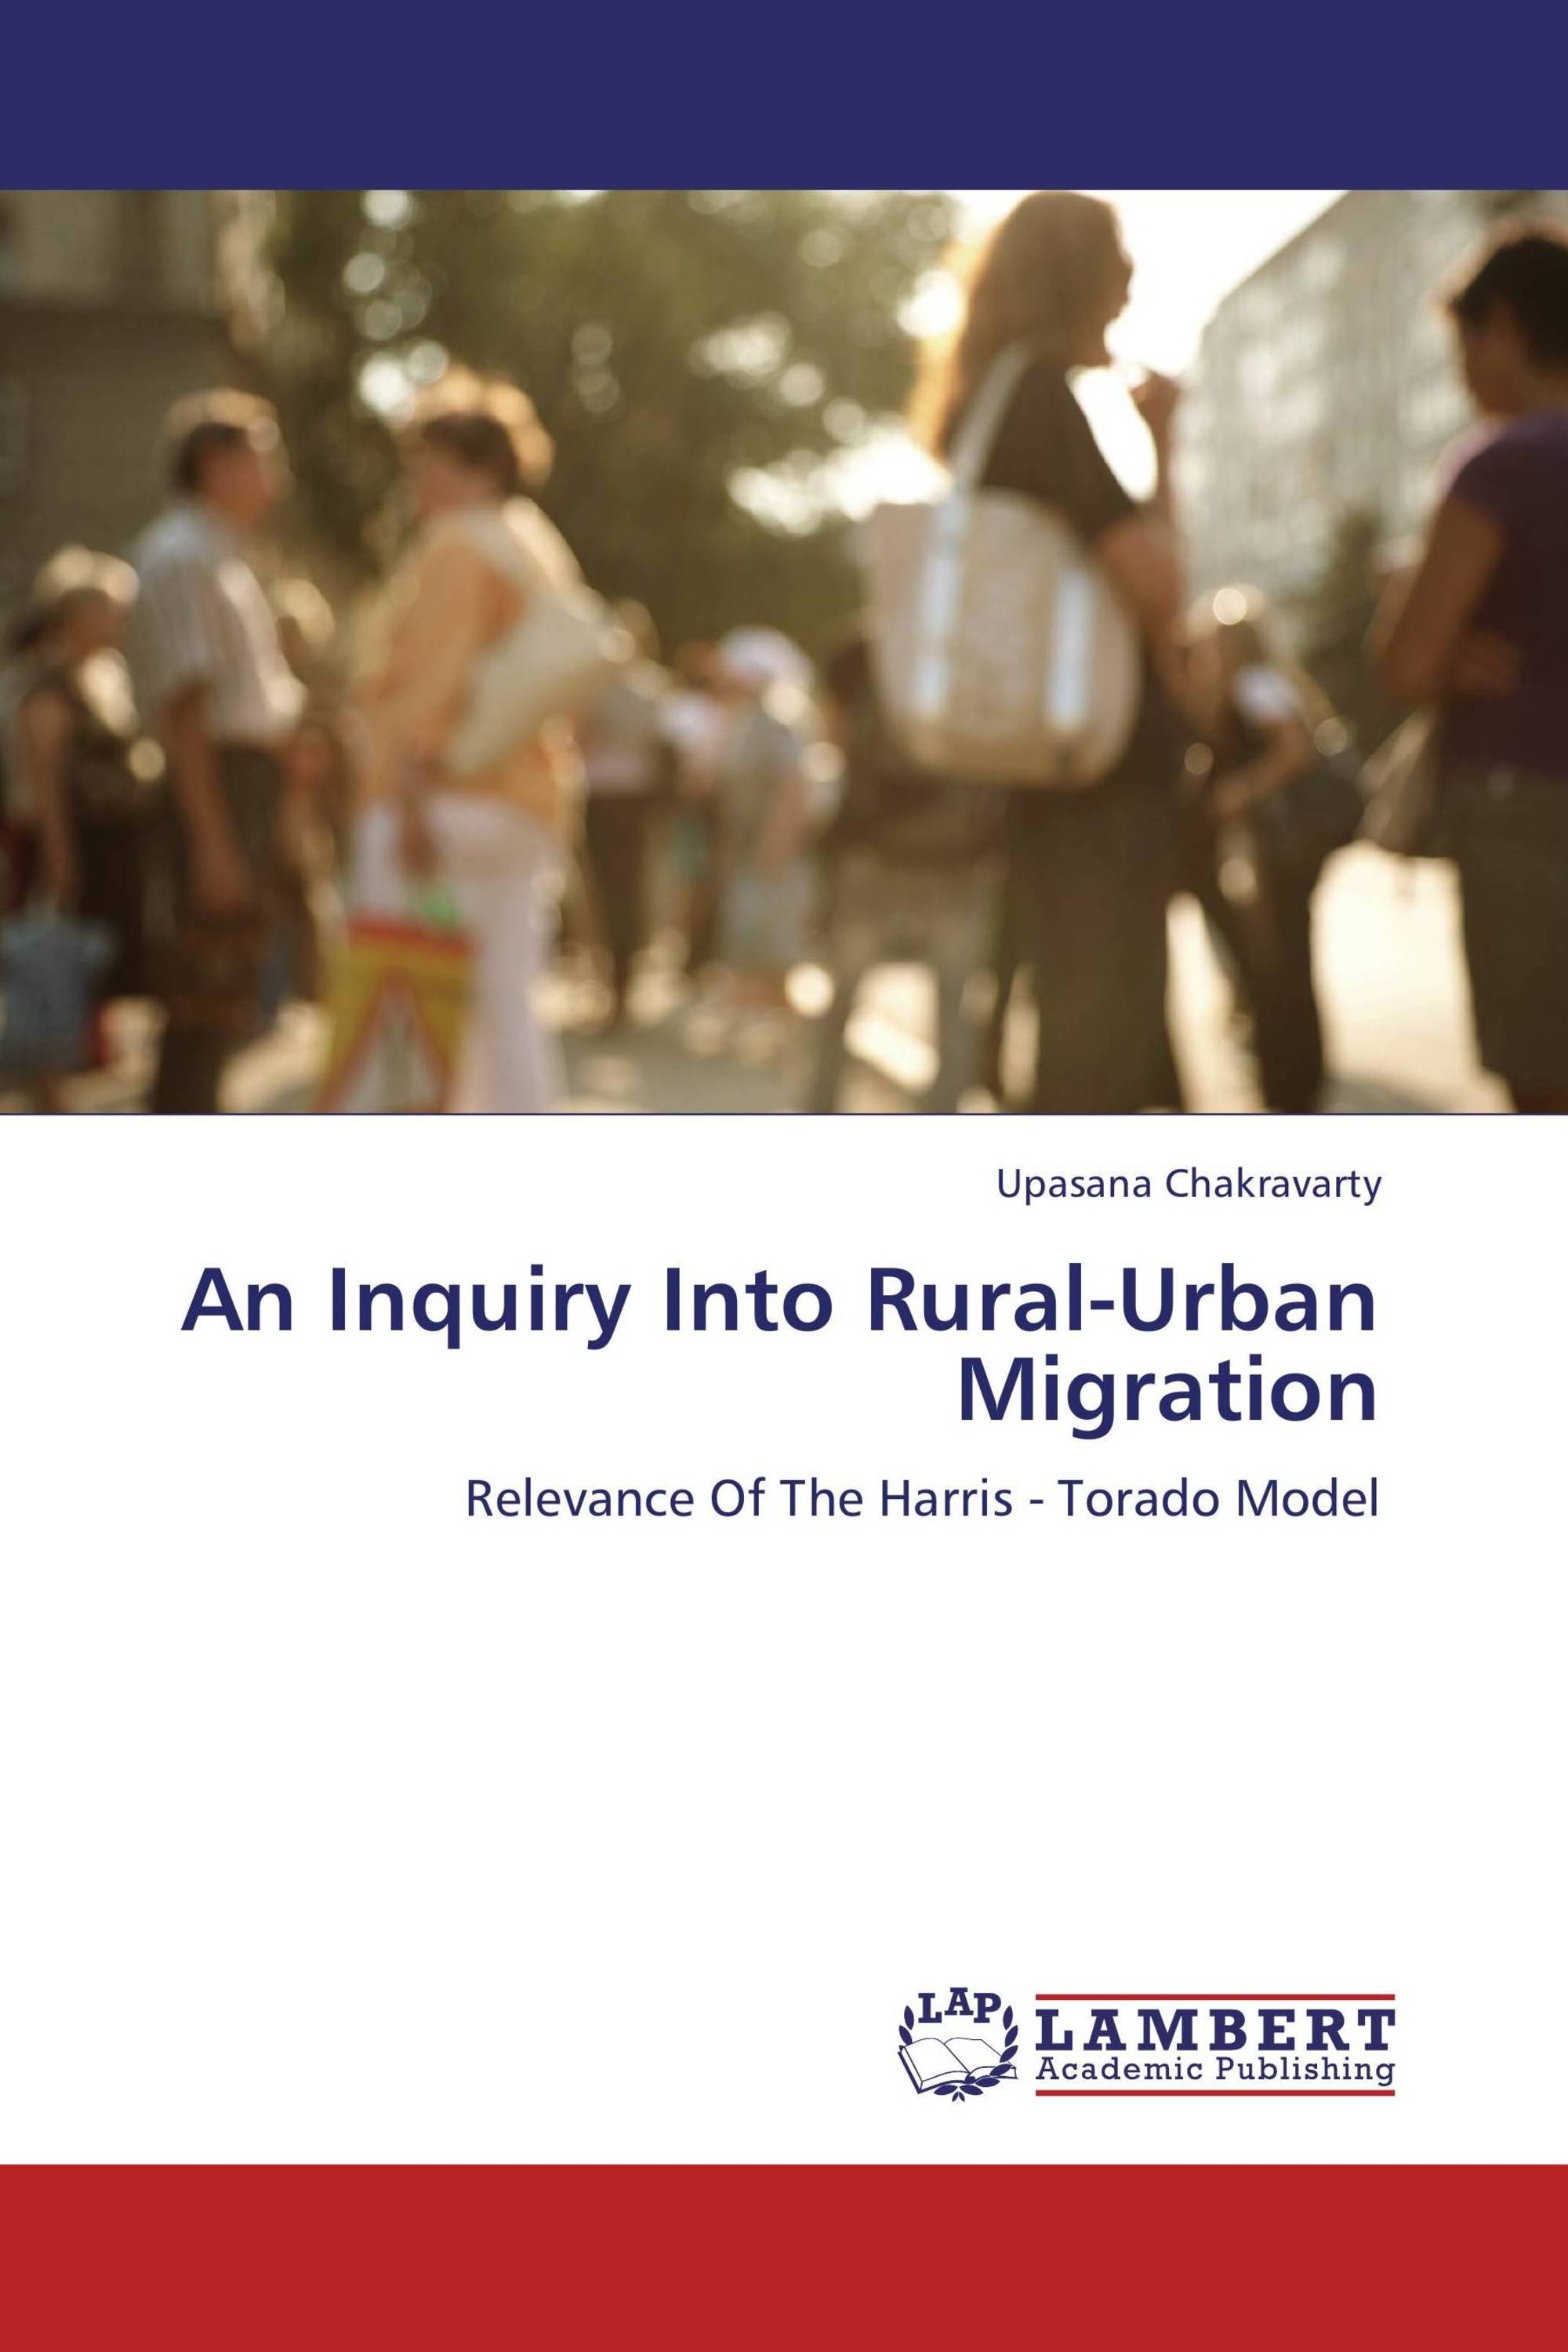 Thesis on rural urban migration